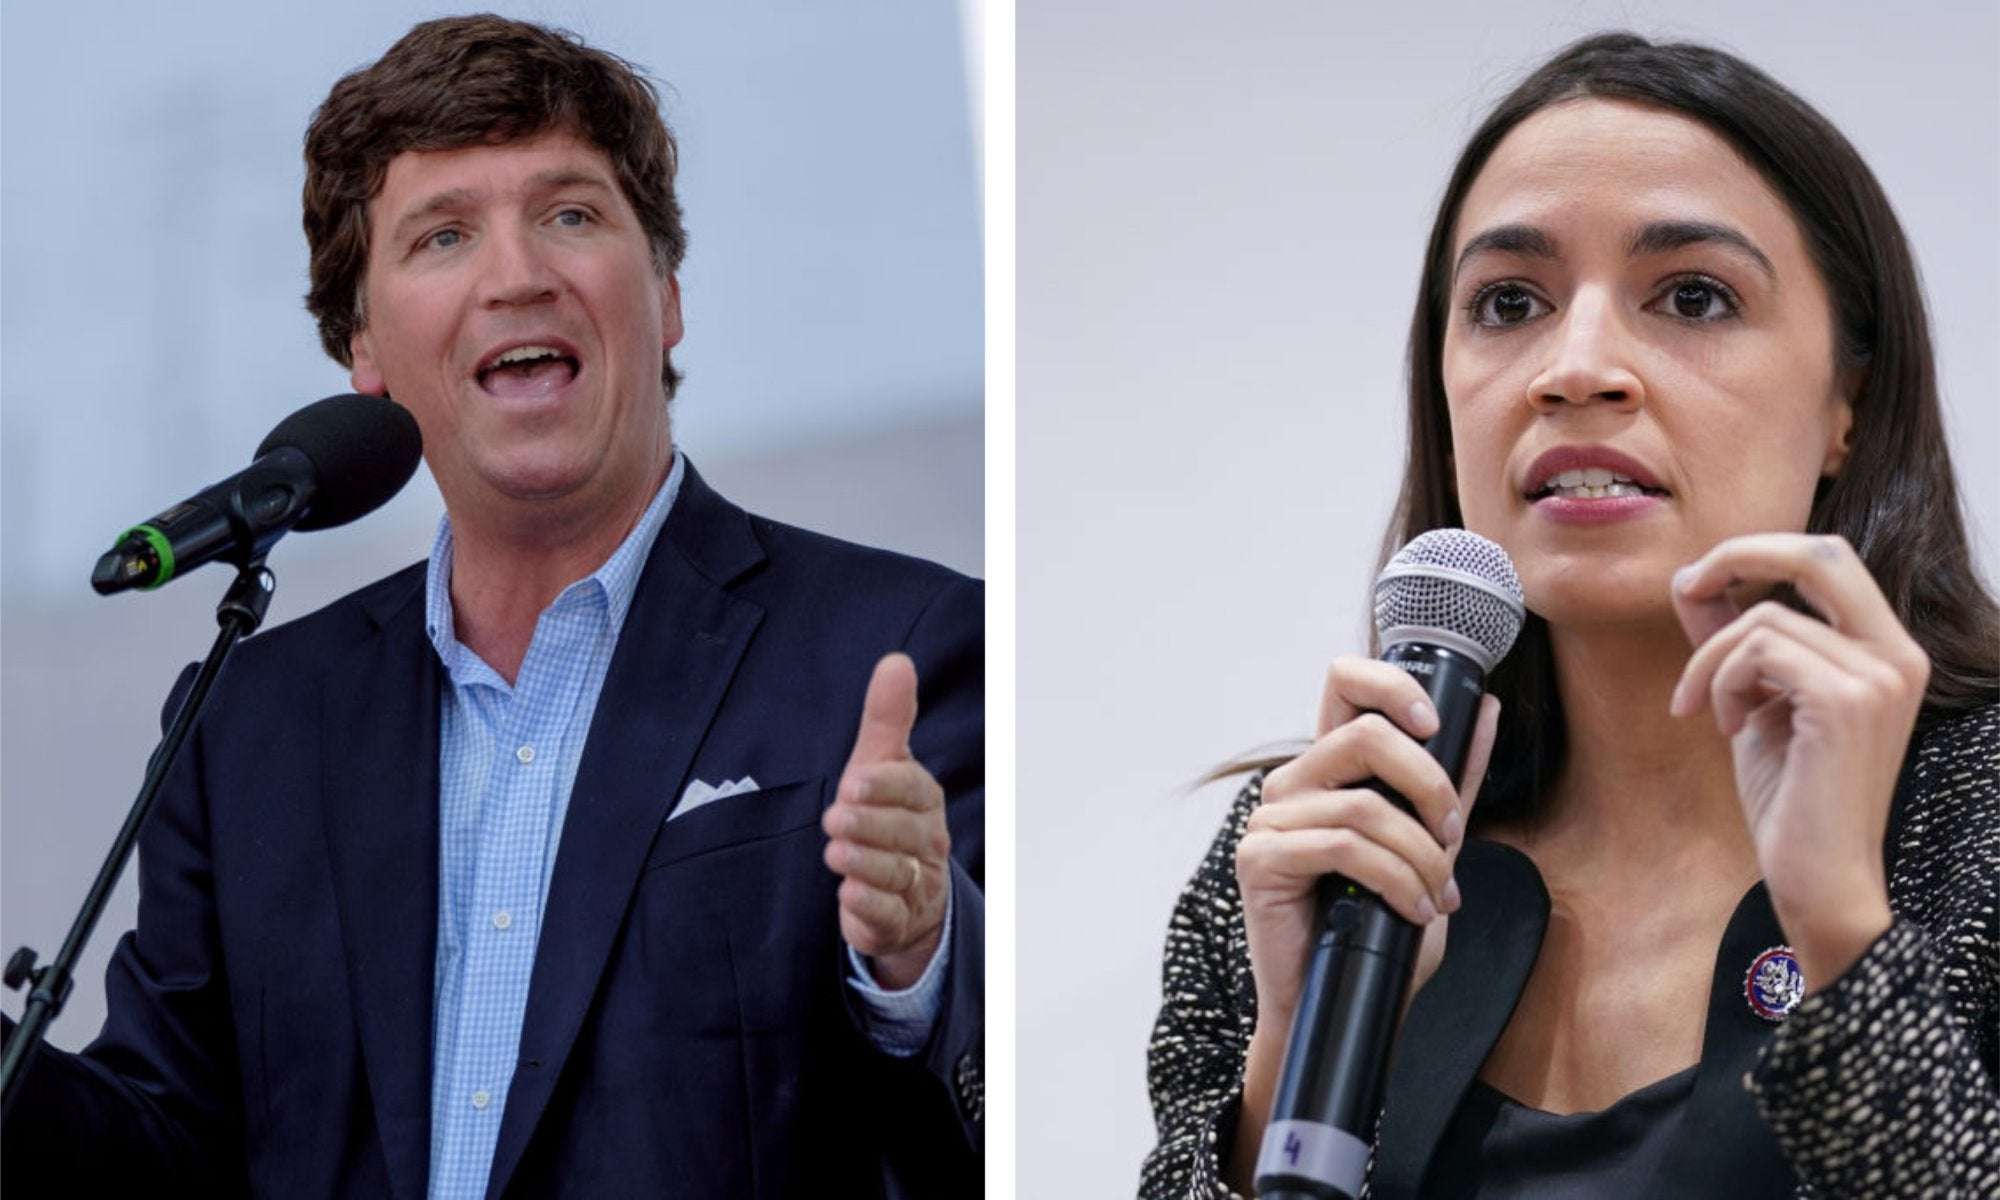 image for AOC Slams Tucker Carlson as 'Trash' After He Calls Her 'Rich White Lady'